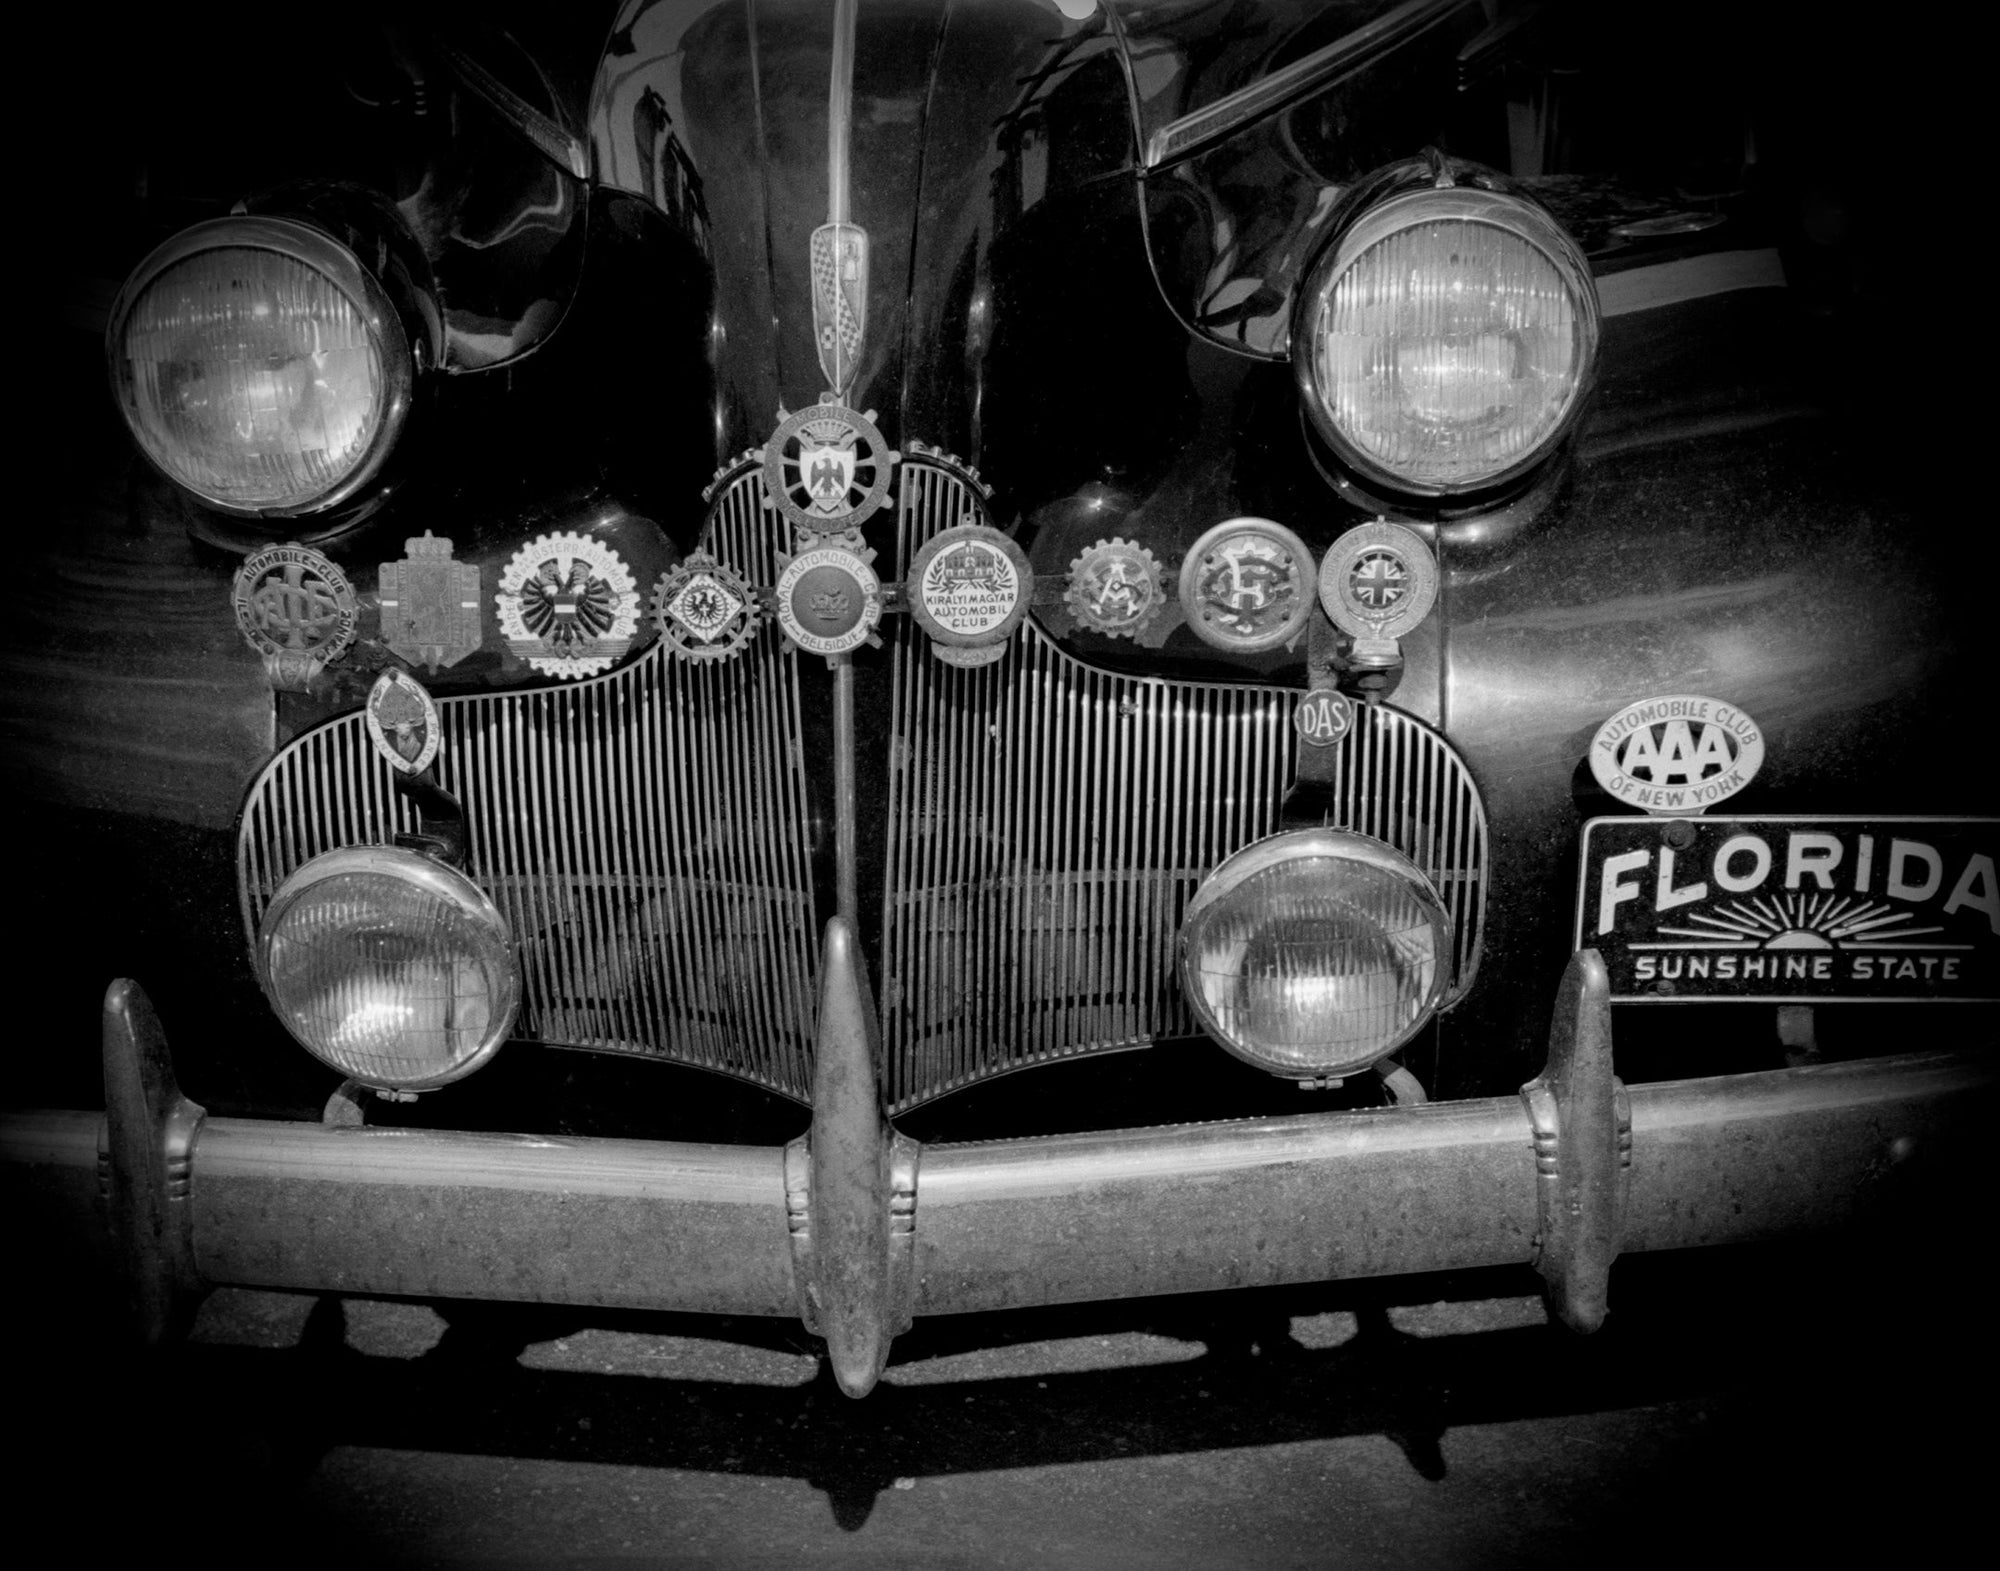 Tourist's Car With Car Club Badges, 1940s, Russell Lee Historical Pix